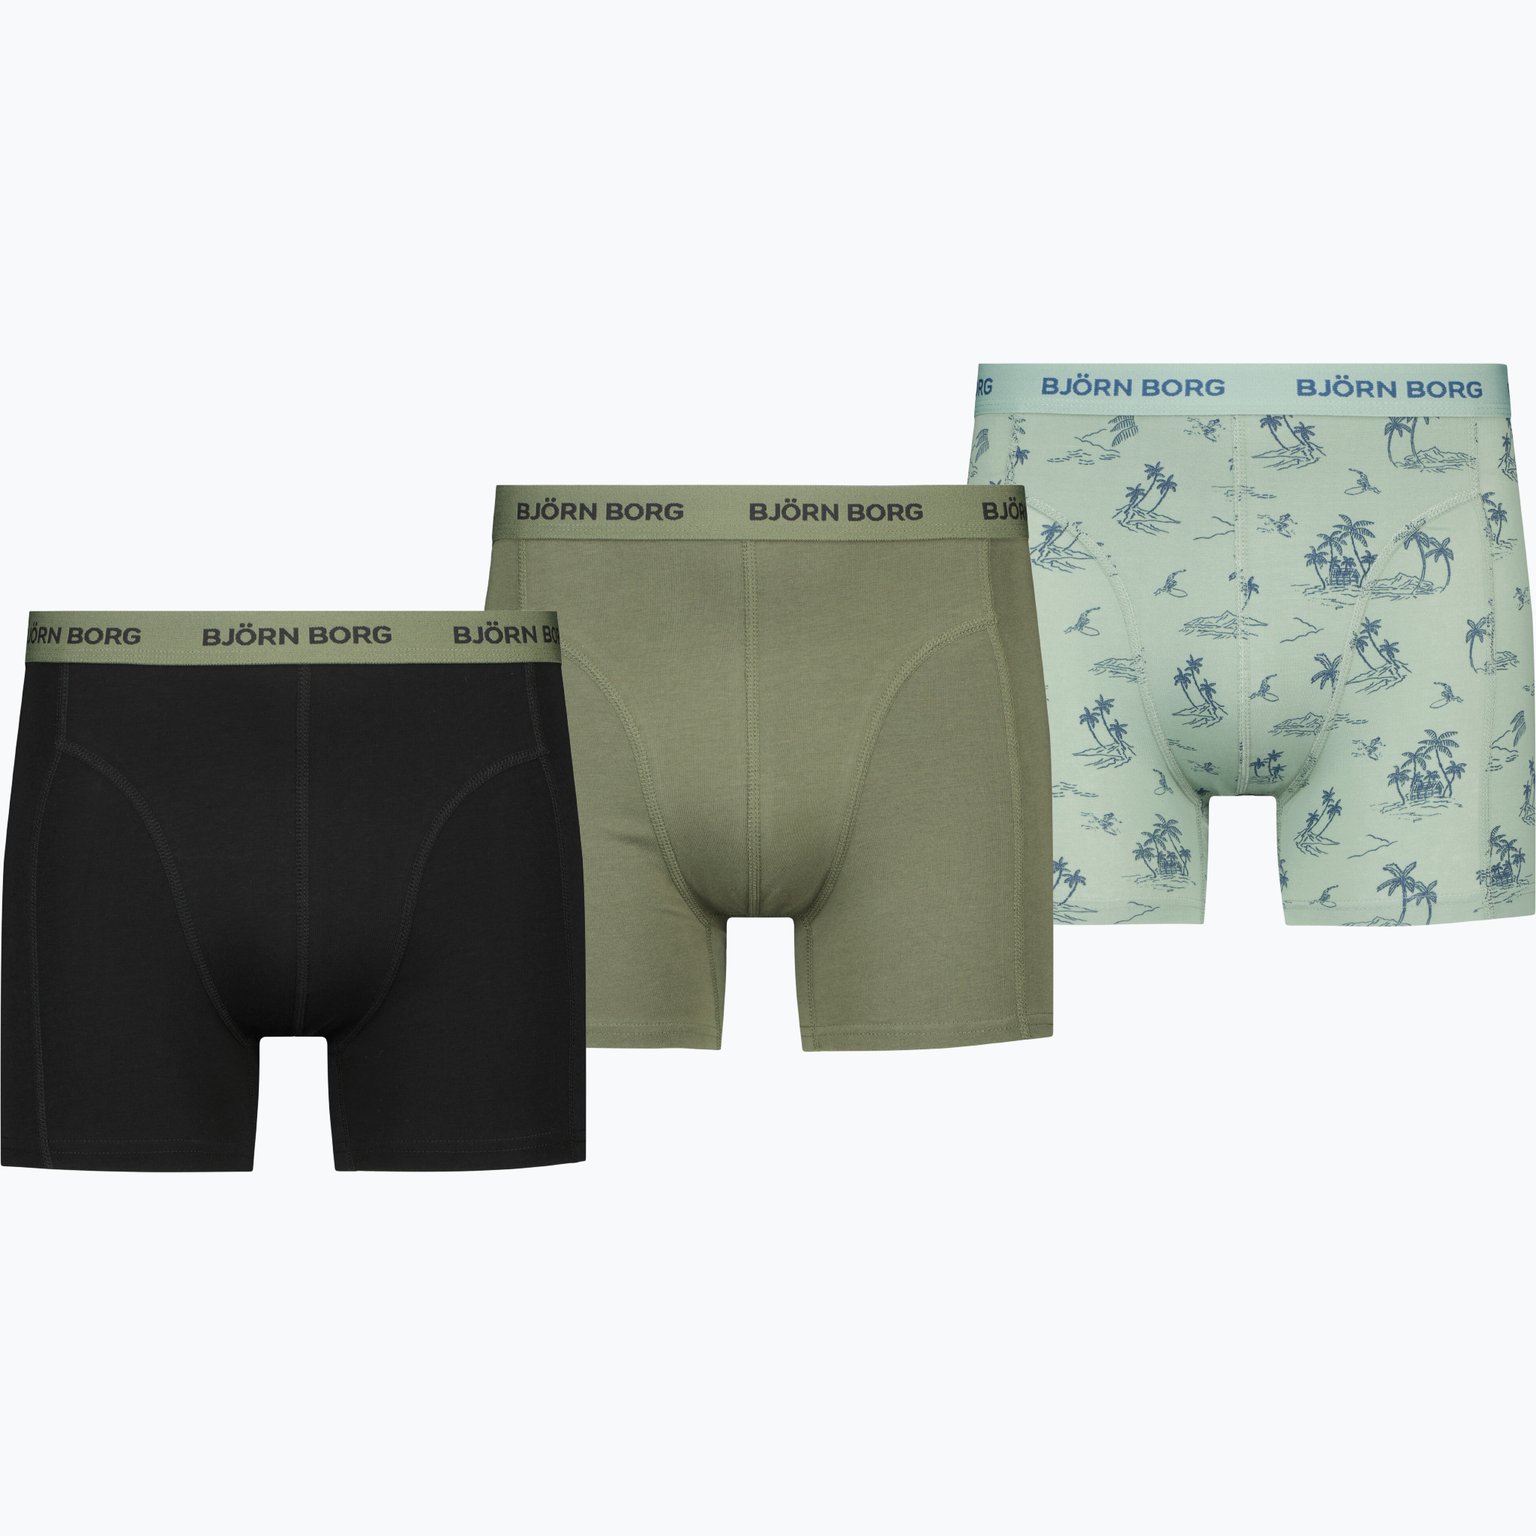 Cotton Stretch 3-pack kalsonger